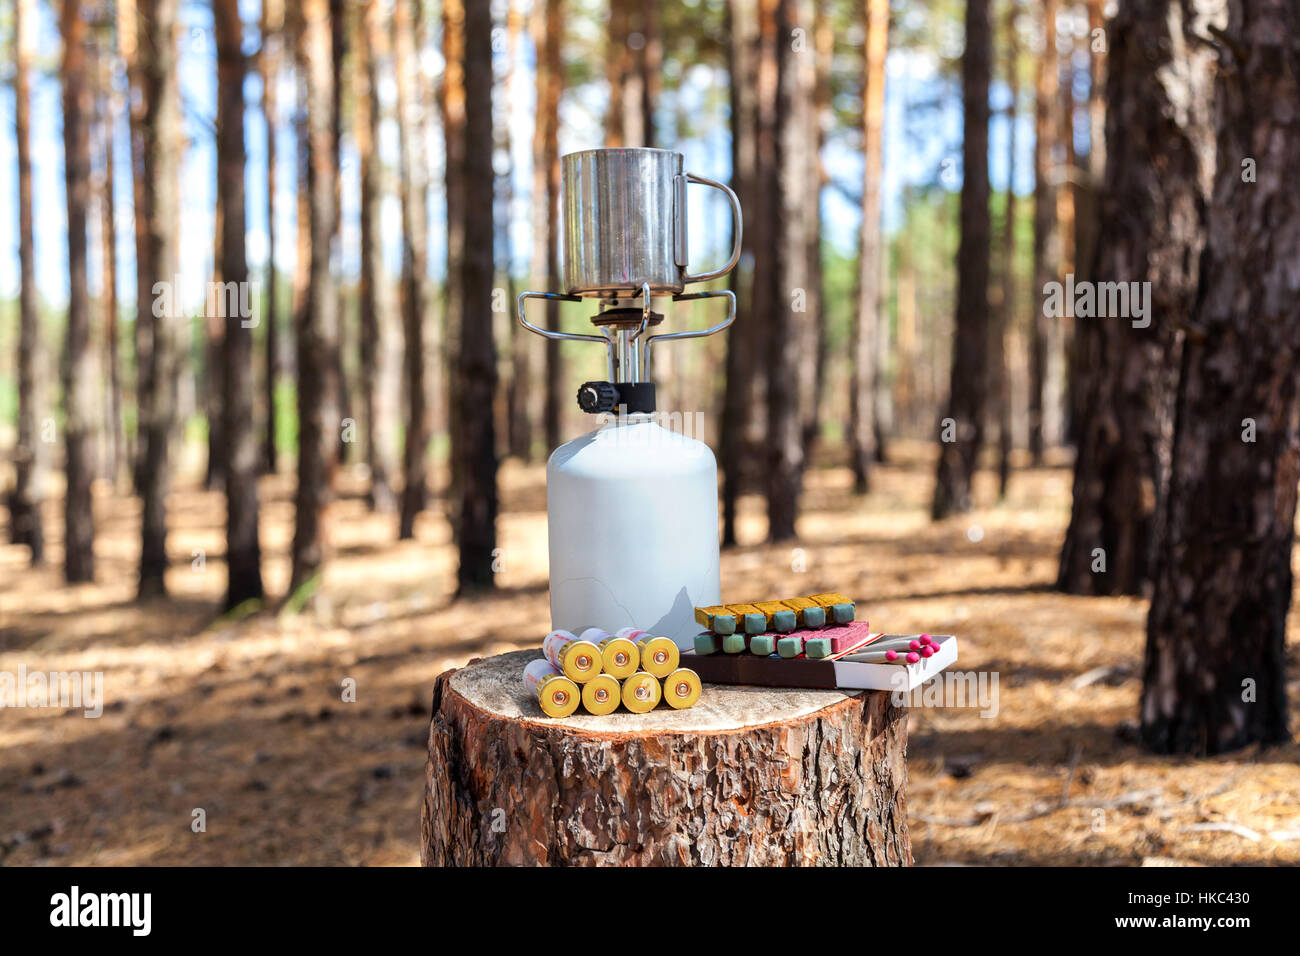 Gas burner in the forest. Gas burner with metal cup, cup of weapons ammunition and hunting matches on the stump in the forest. Stock Photo